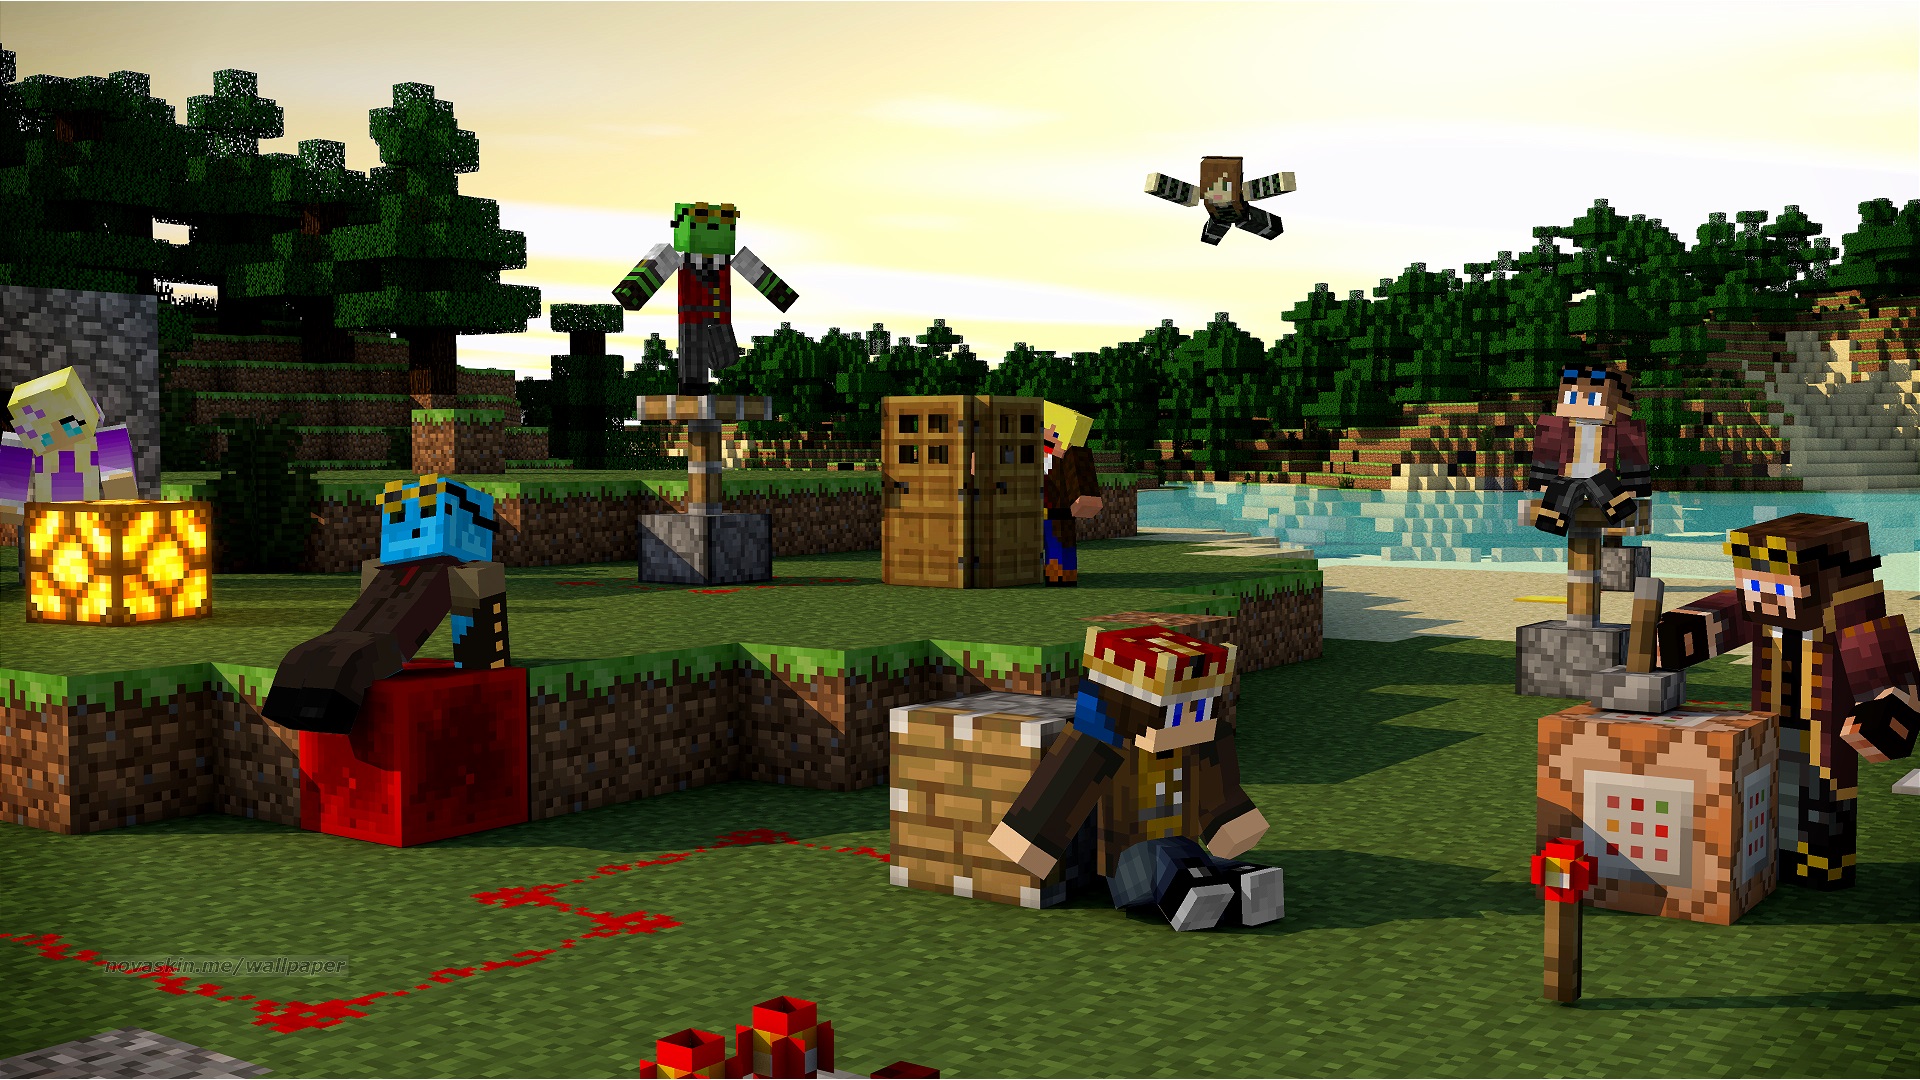 Awesome Wallpaper Cubecraft Games